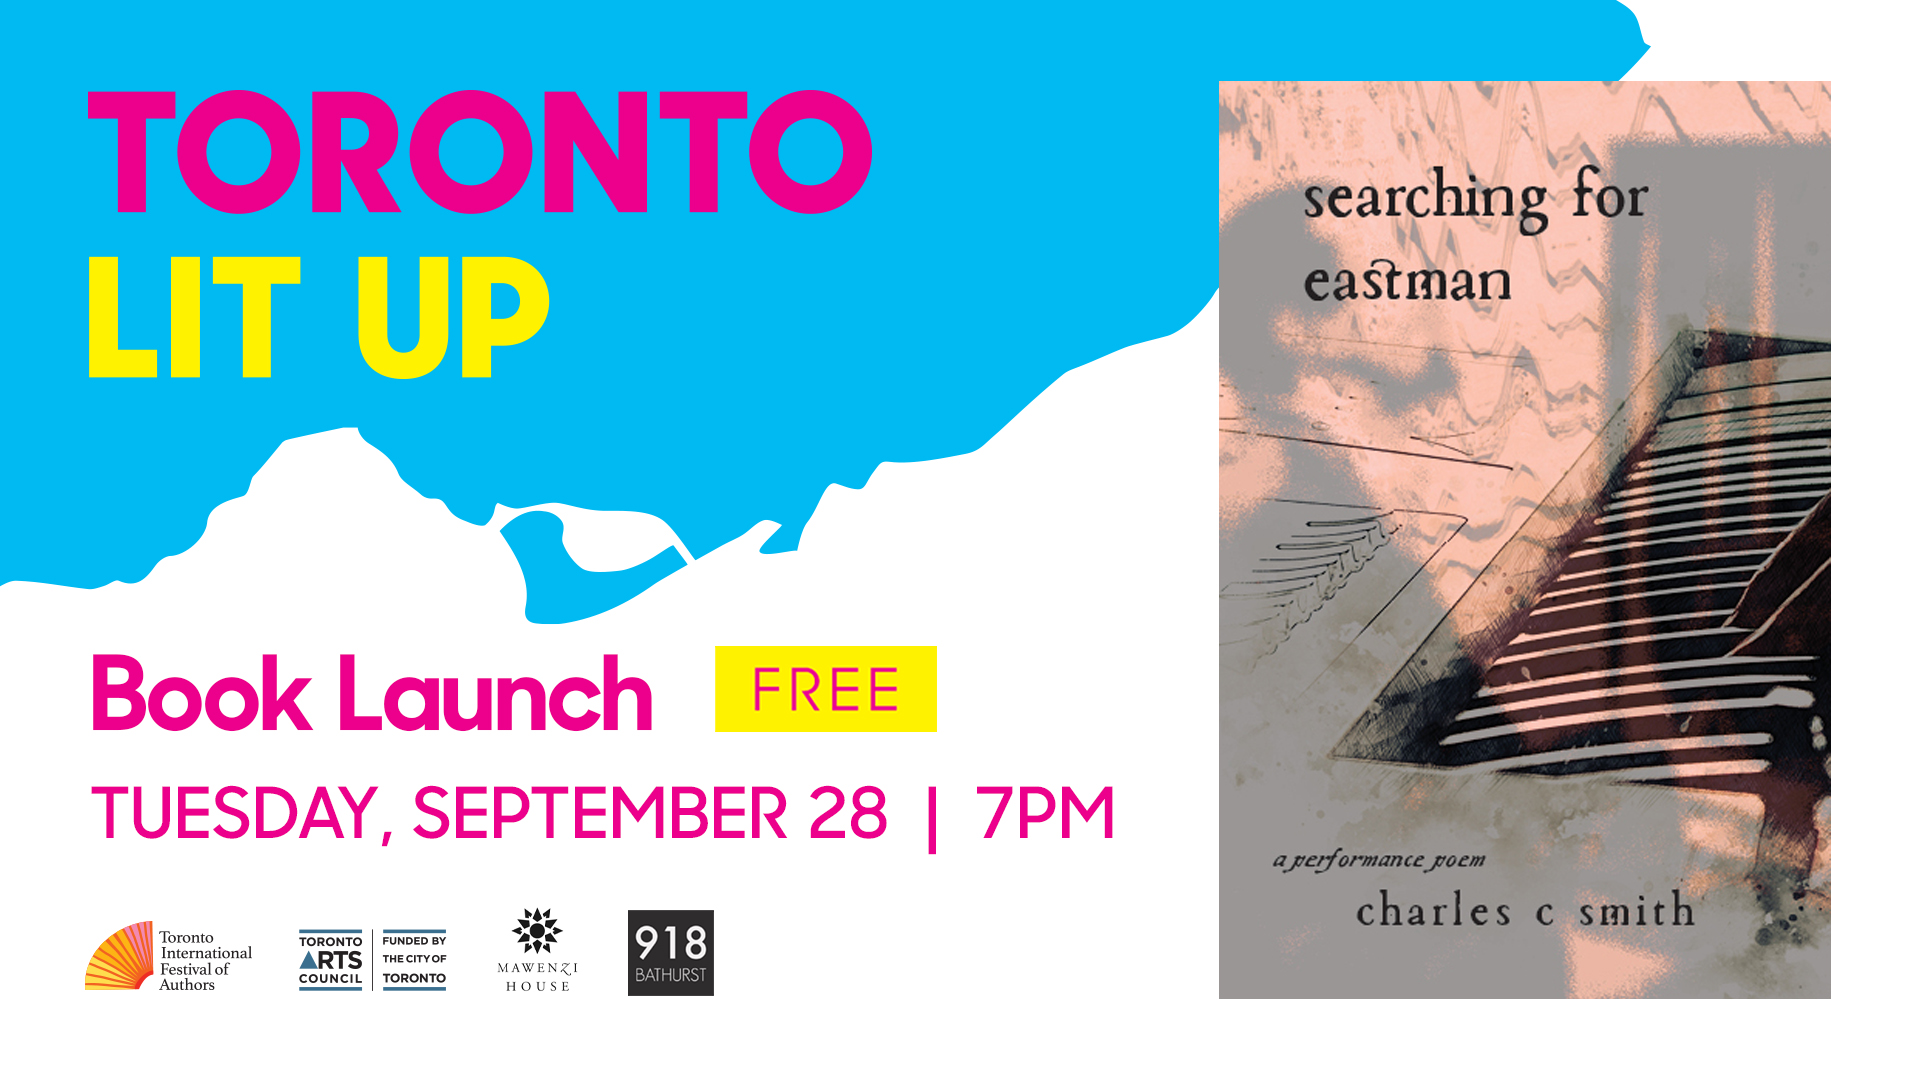 charles c smith Toronto Lit Up banner with the book cover of searching for eastman and "Book Launch Free Sunday September 28 7pm". Includes TIFA, Toronto Arts Council, Mawenzi House and 918 Bathurst logo